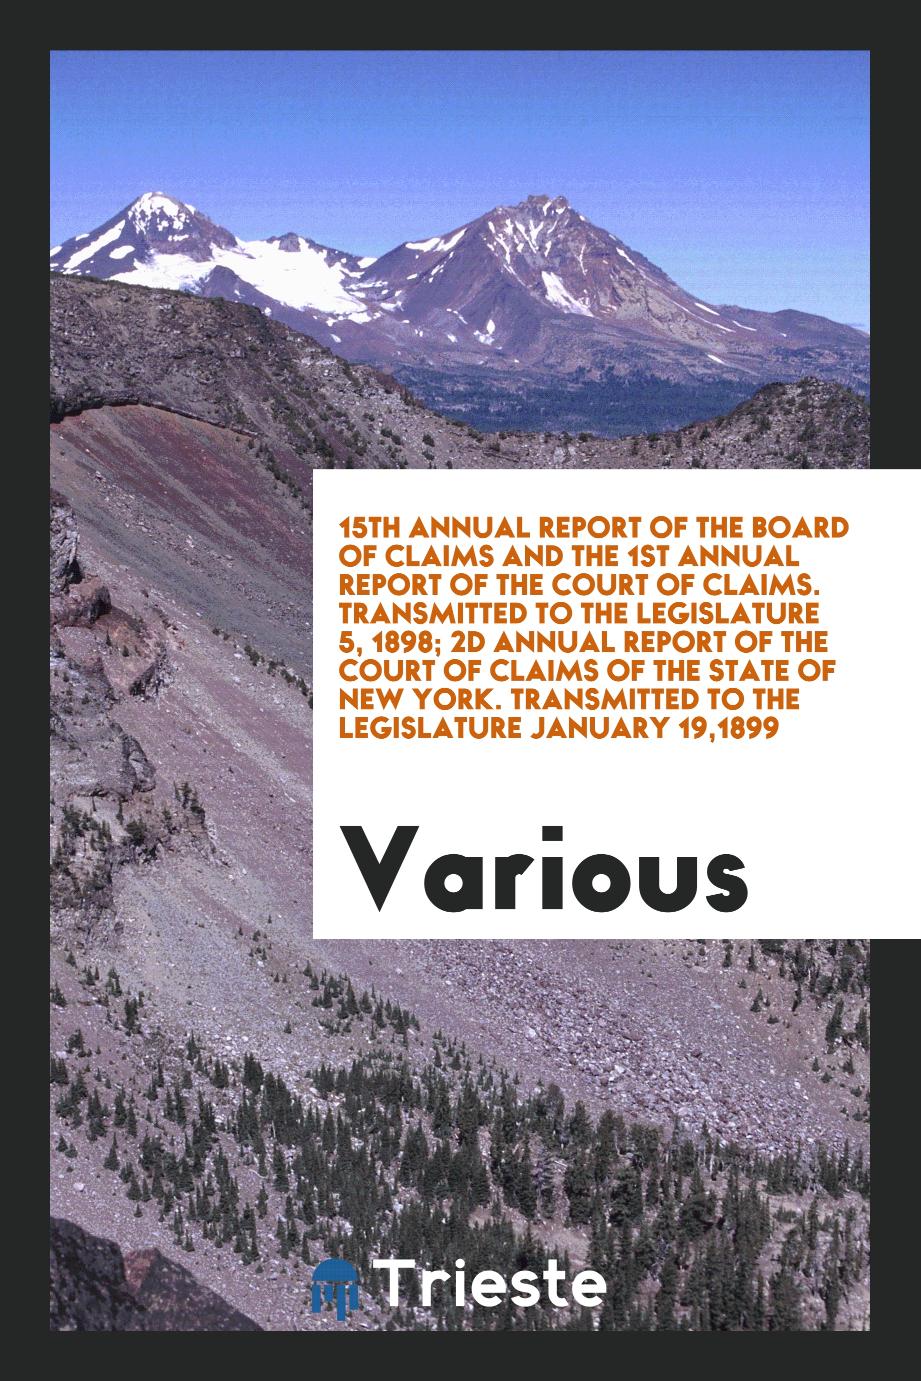 15th Annual Report of the Board of Claims and the 1st Annual Report of the Court of Claims. Transmitted to the Legislature 5, 1898; 2d Annual Report of the Court of Claims of the State of New York. Transmitted to the Legislature January 19,1899